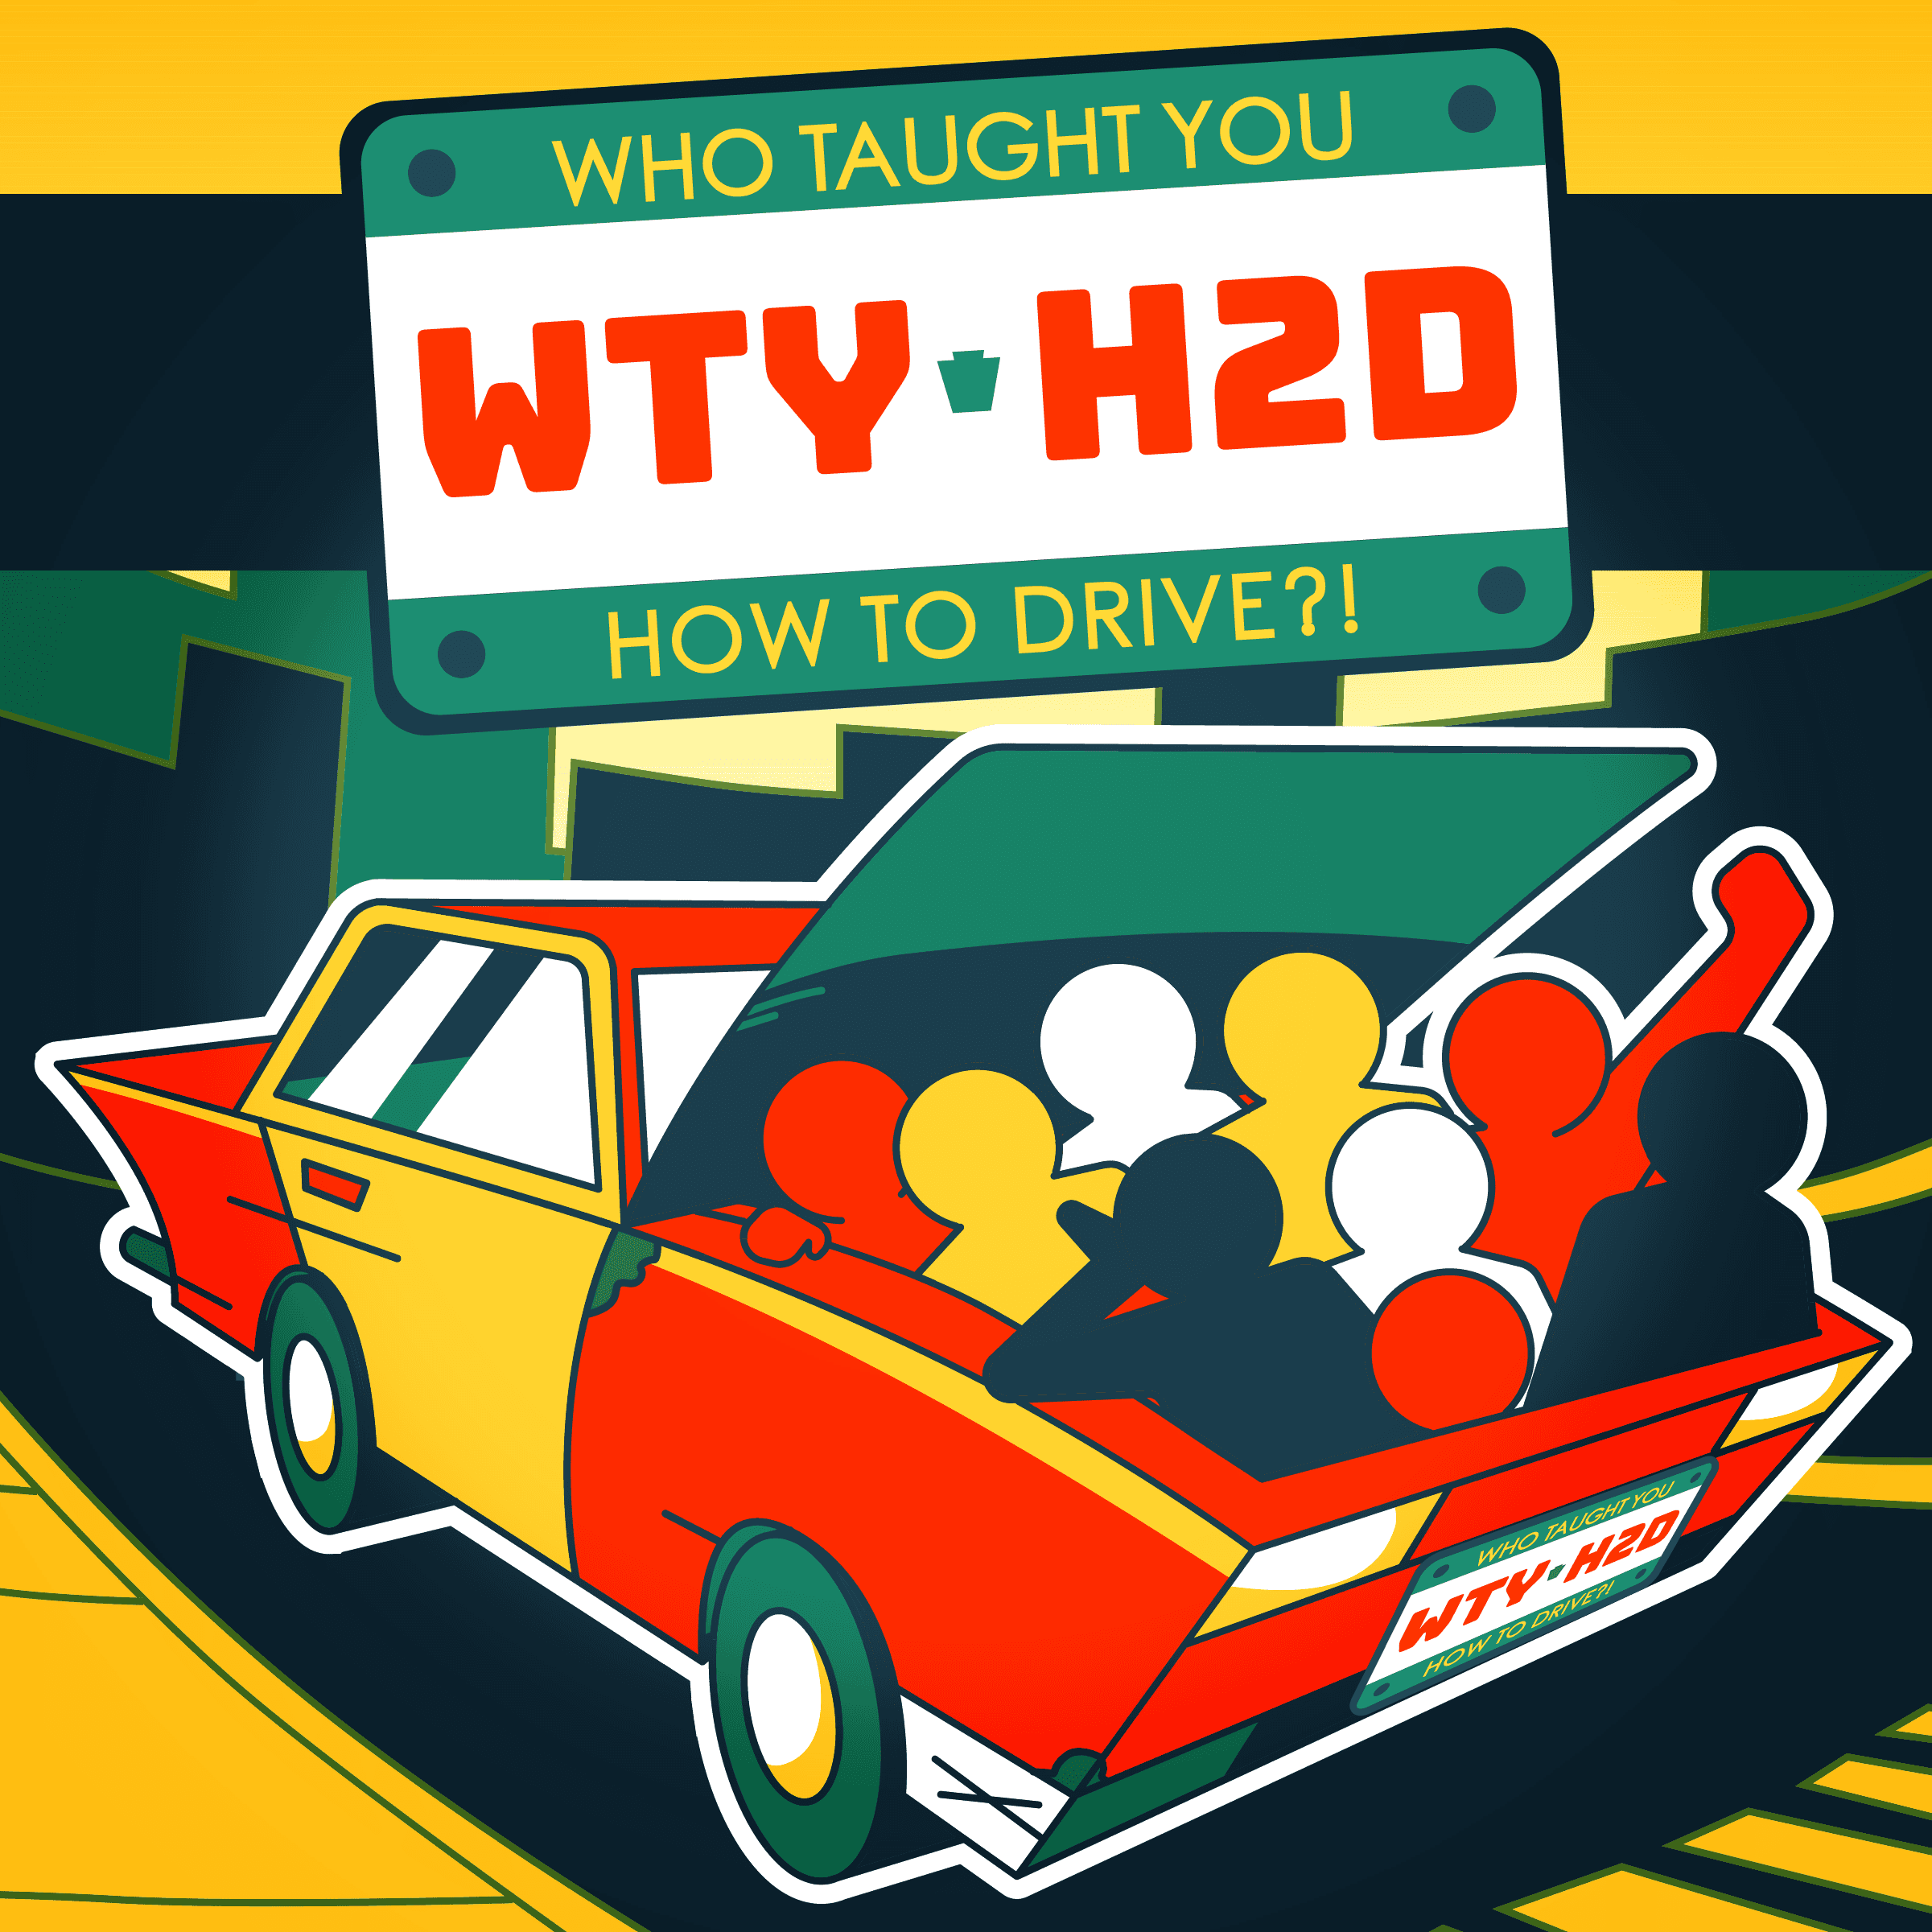 Thumbnail for "Who Taught You How To Drive Promo".